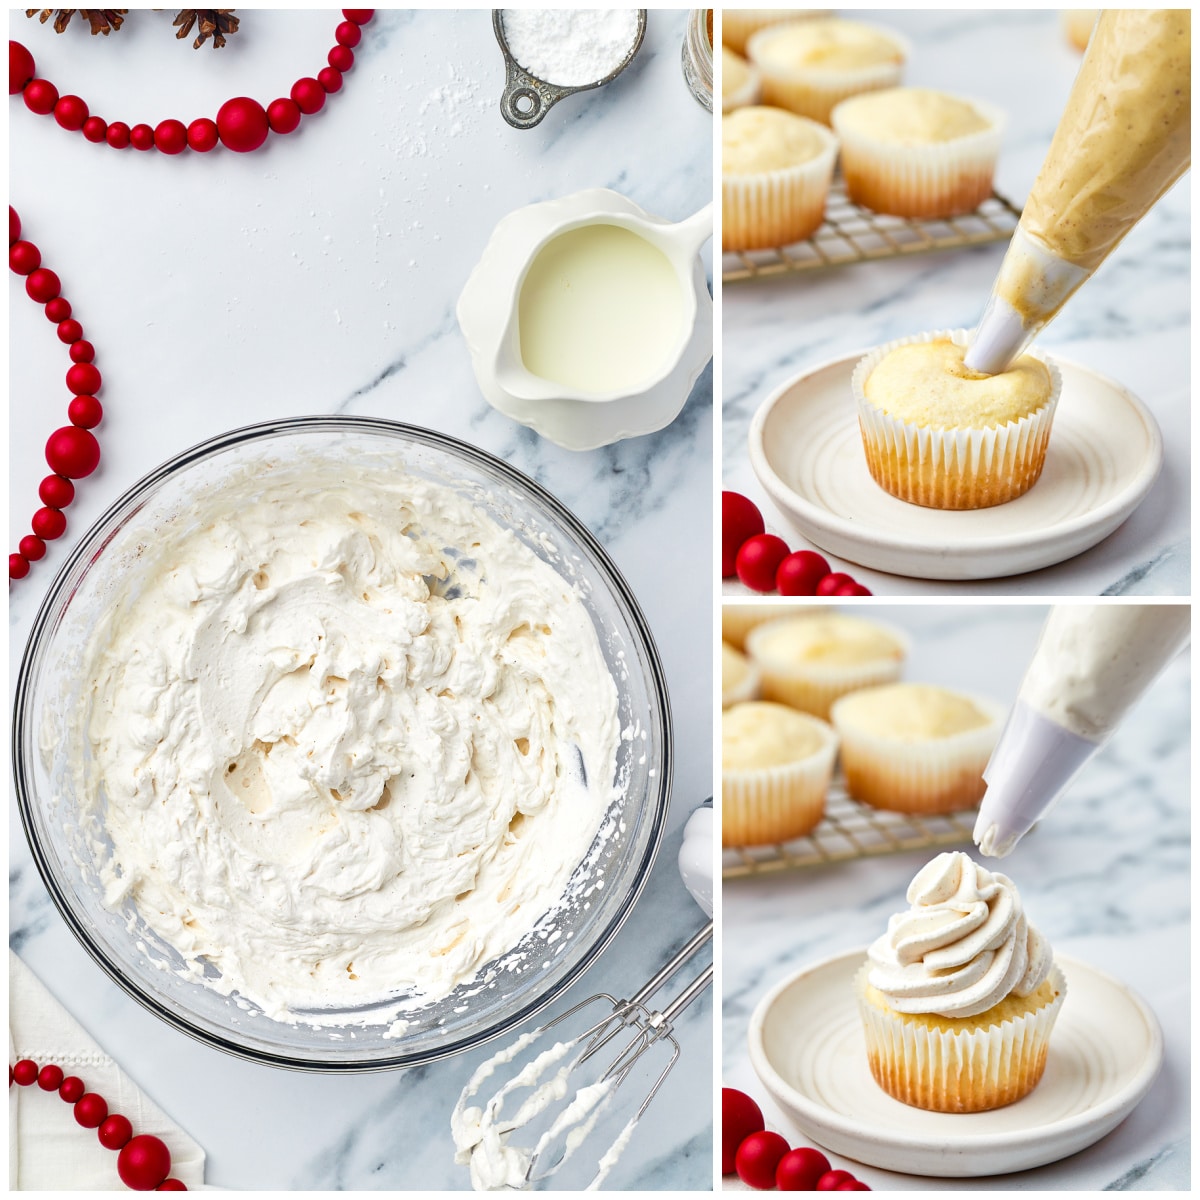 Step by step photos on how to assemble cupcakes.